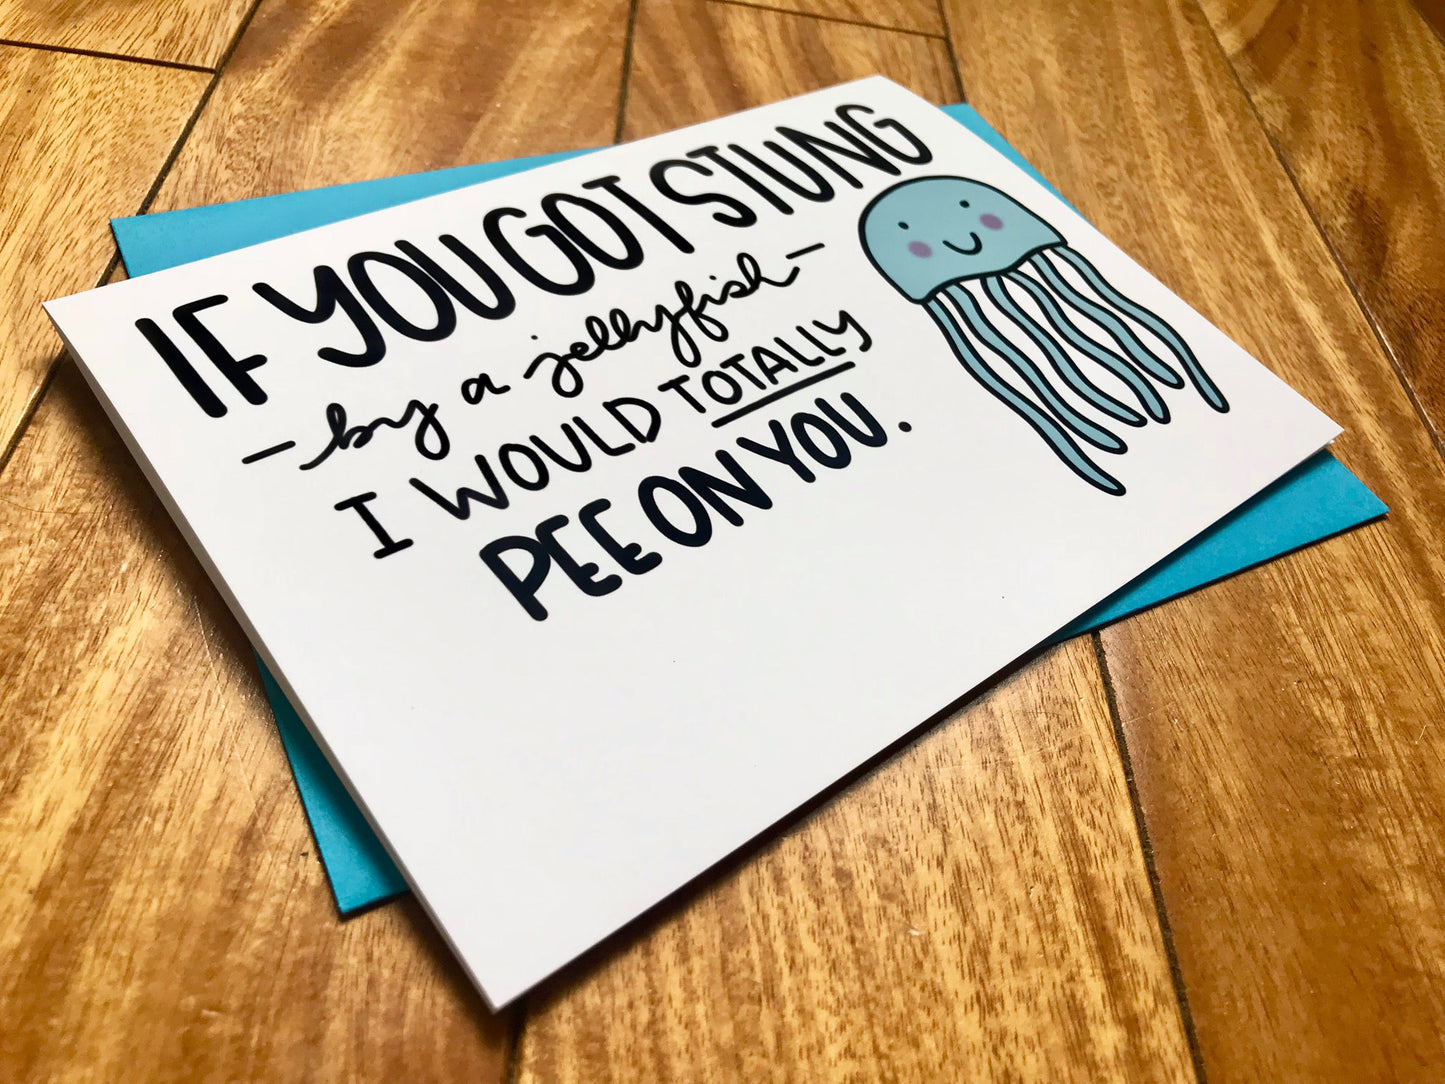 If You Got Stung by a Jellyfish I Would Pee On You by StoneDonut Design